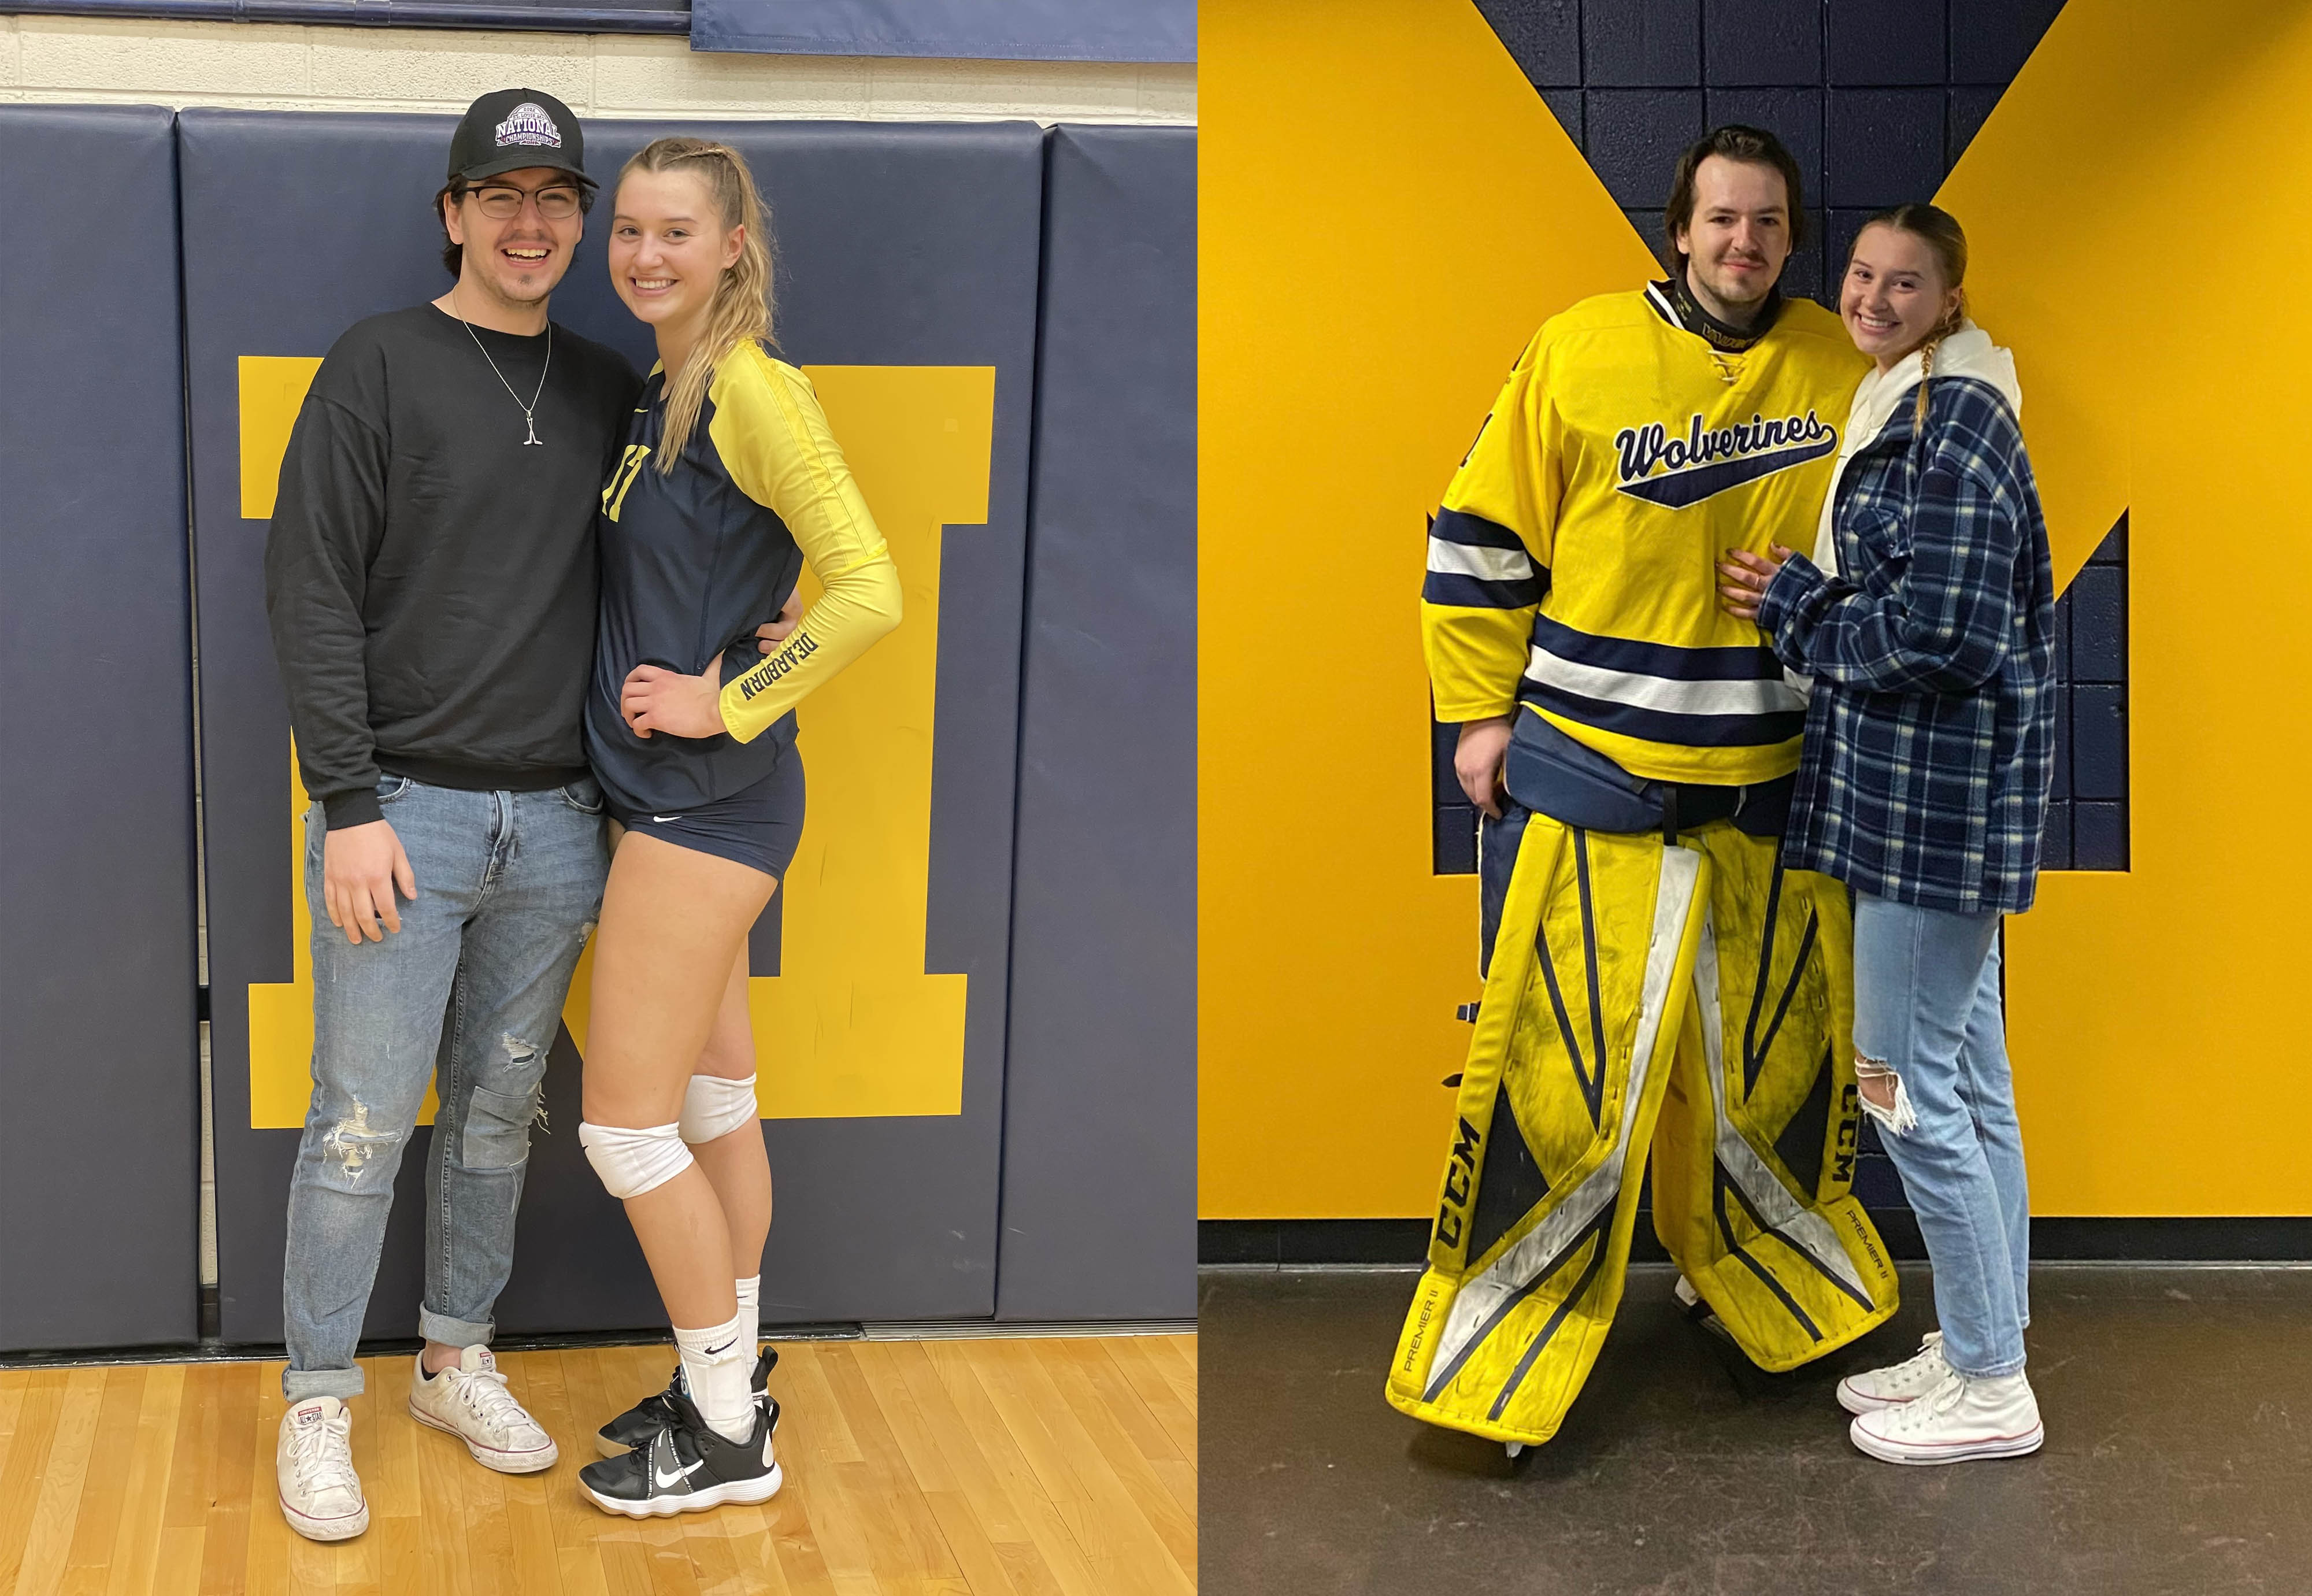 Two photos of couple Kayden Pickles and Allie Federlein. In one shot, Kayden is wearning his UM-Dearborn goal pads and uniform; in the other, Allie is wearing her athletics uniform.